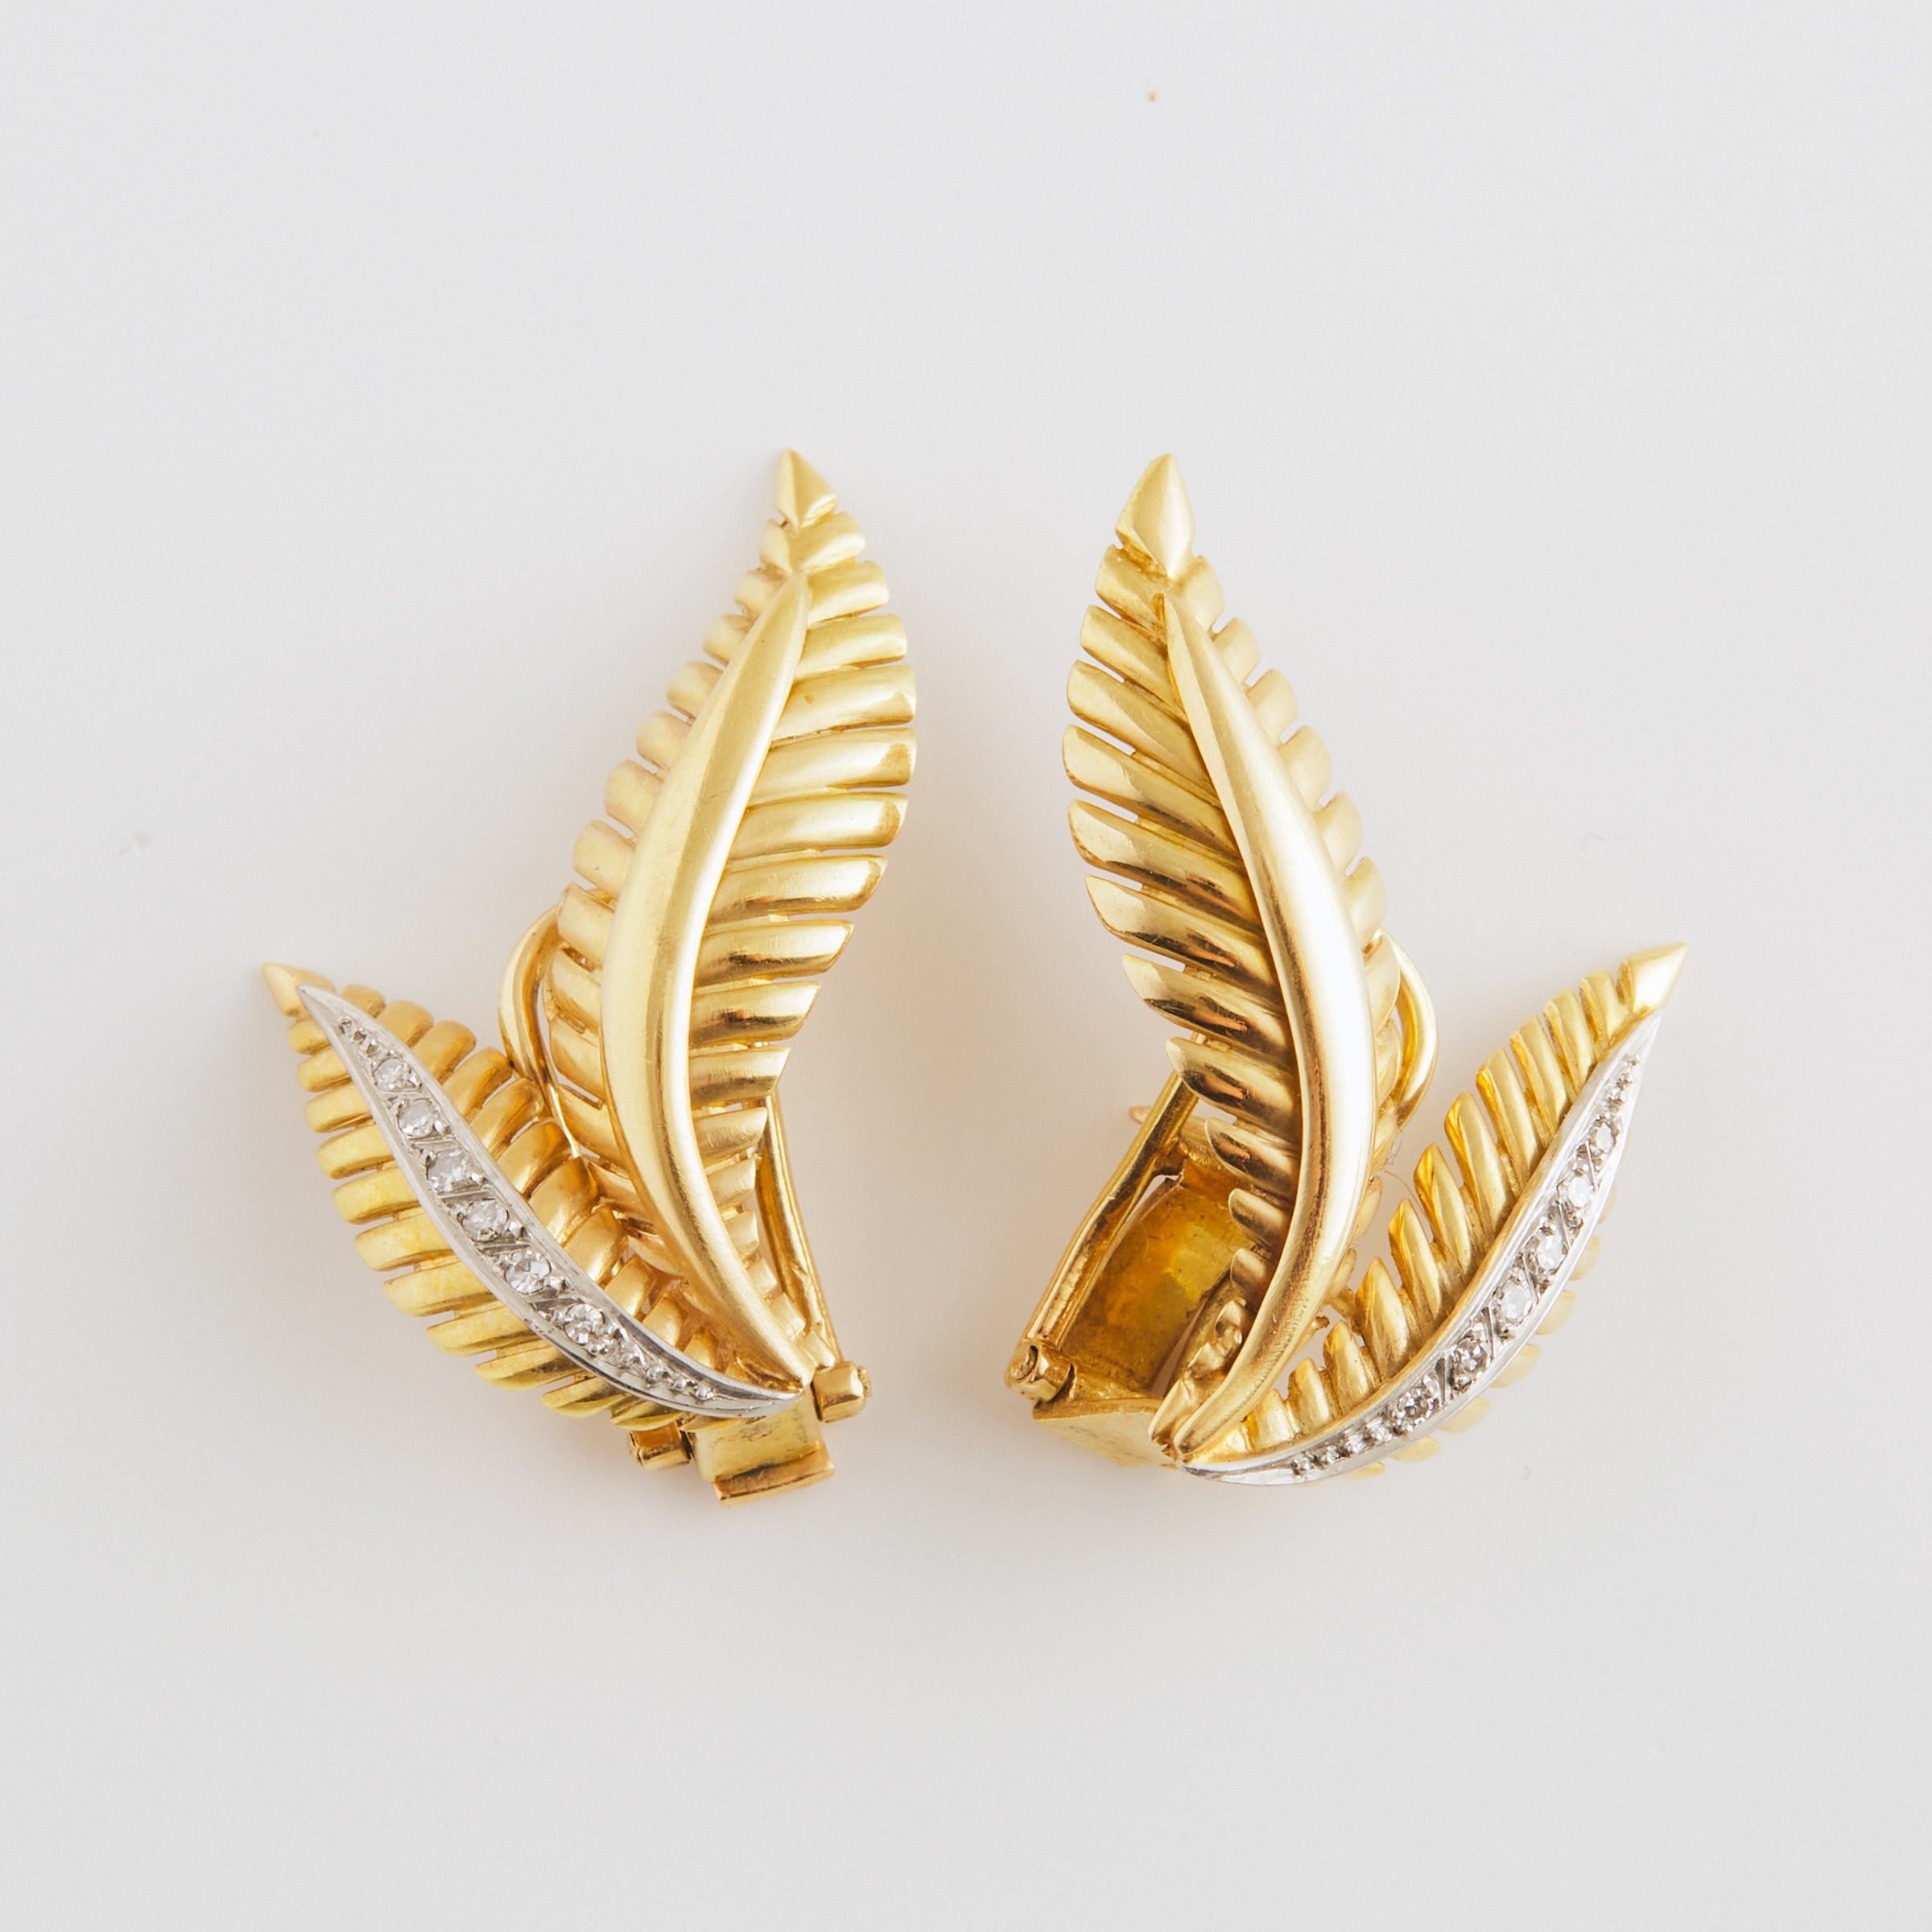 Pair Of 18k Yellow And White Gold Foliate Earrings